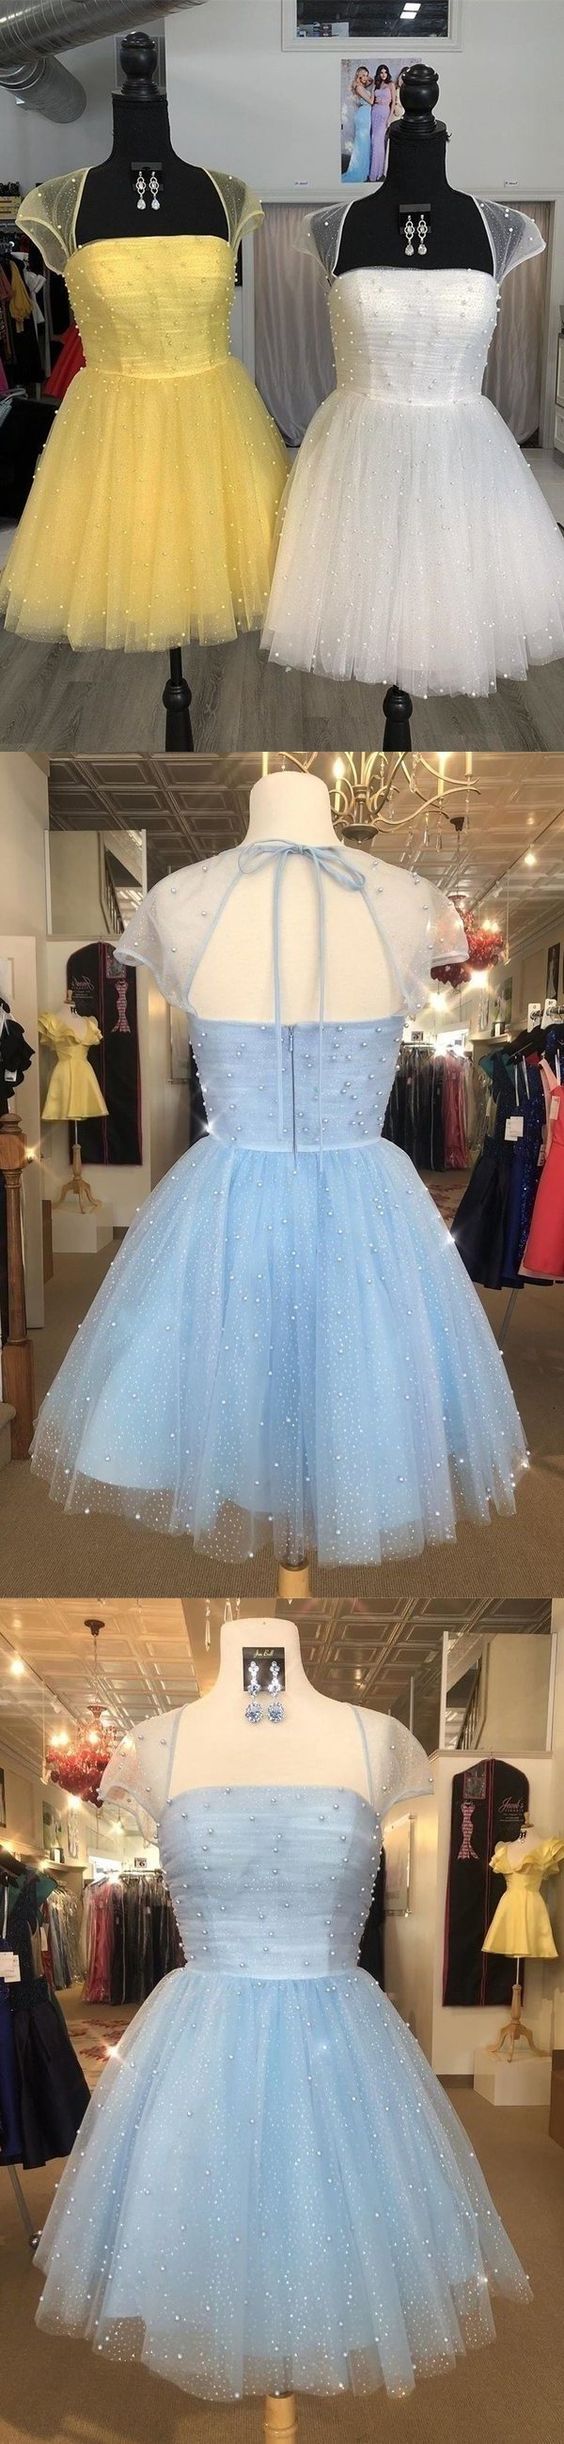 Sparkle Beaded Cap Sleeves Tulle Homecoming Dress Sweet 16 Dresses  cg8833